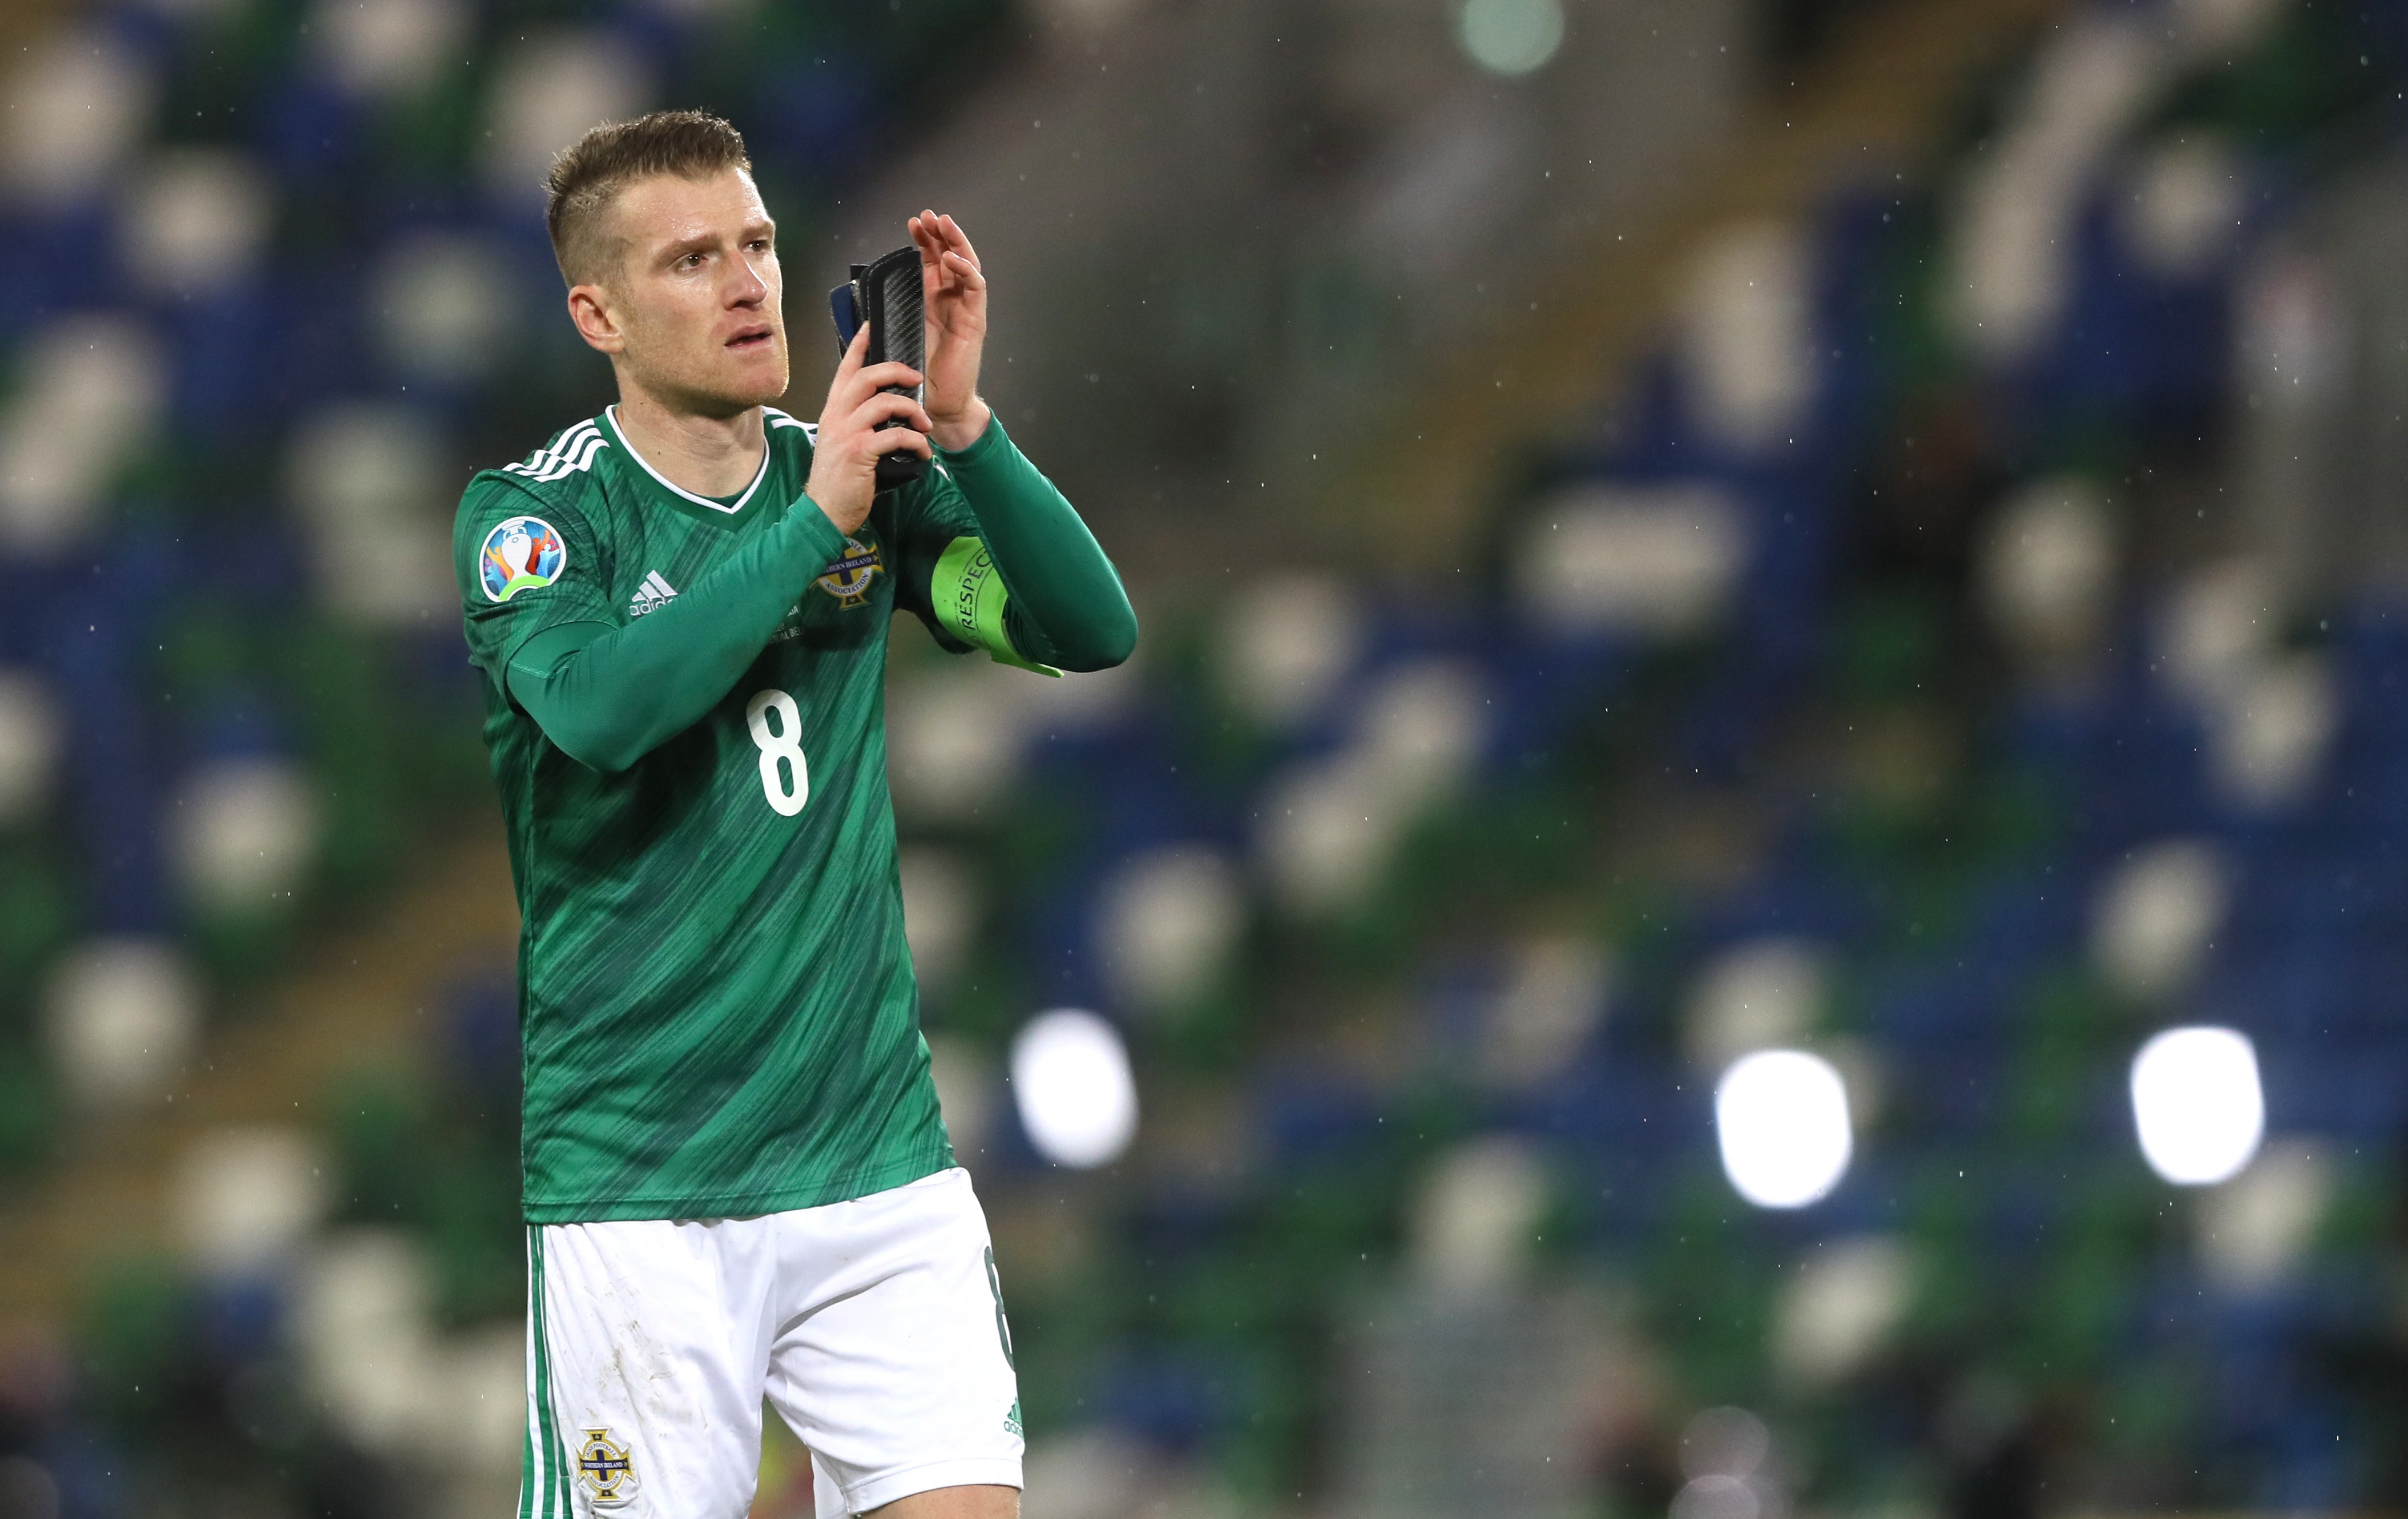 Veteran Steven Davis’s plans are up in the air after the end of the season